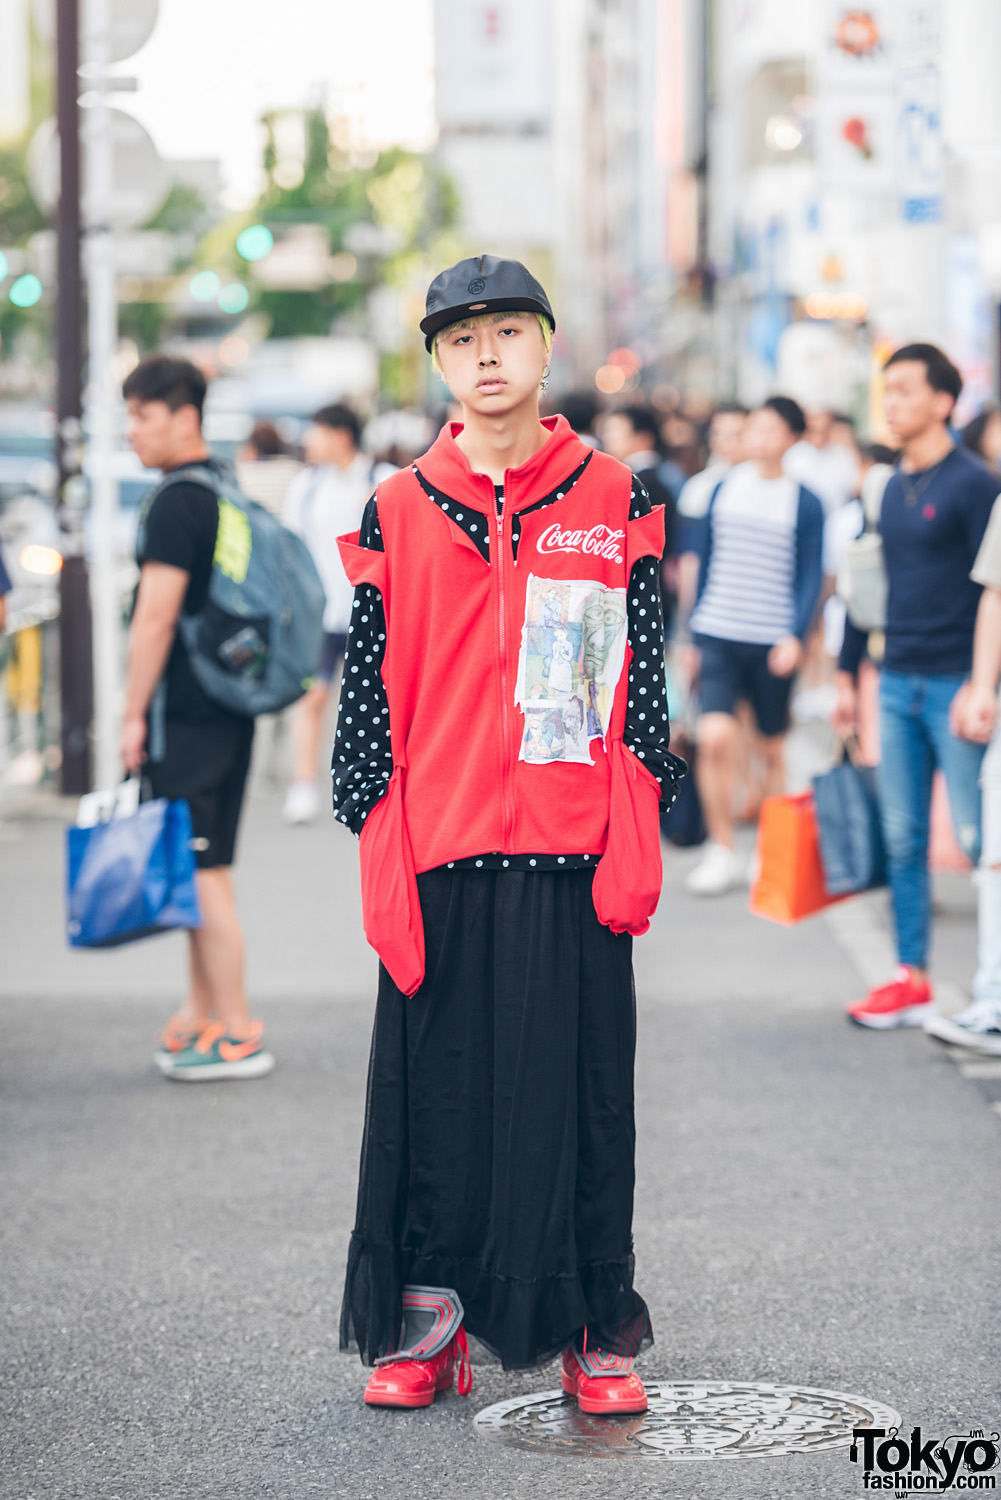 Harajuku Streetwear Style w/ Deconstructed Jacket, Comme des Garcons Play & Happening